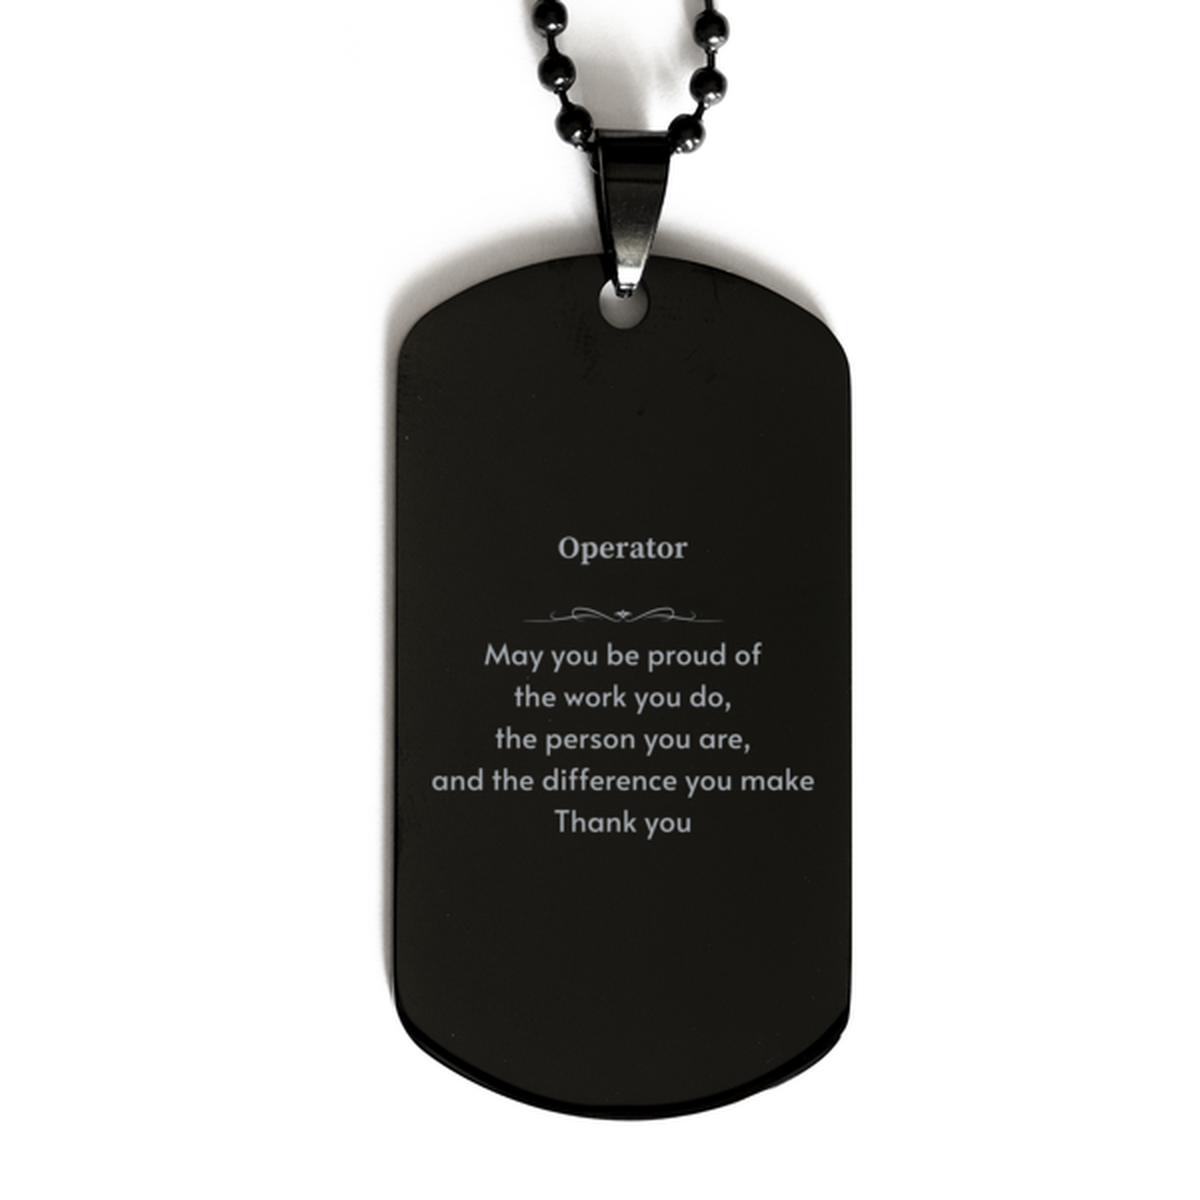 Heartwarming Black Dog Tag Retirement Coworkers Gifts for Operator, Operator May You be proud of the work you do, the person you are Gifts for Boss Men Women Friends